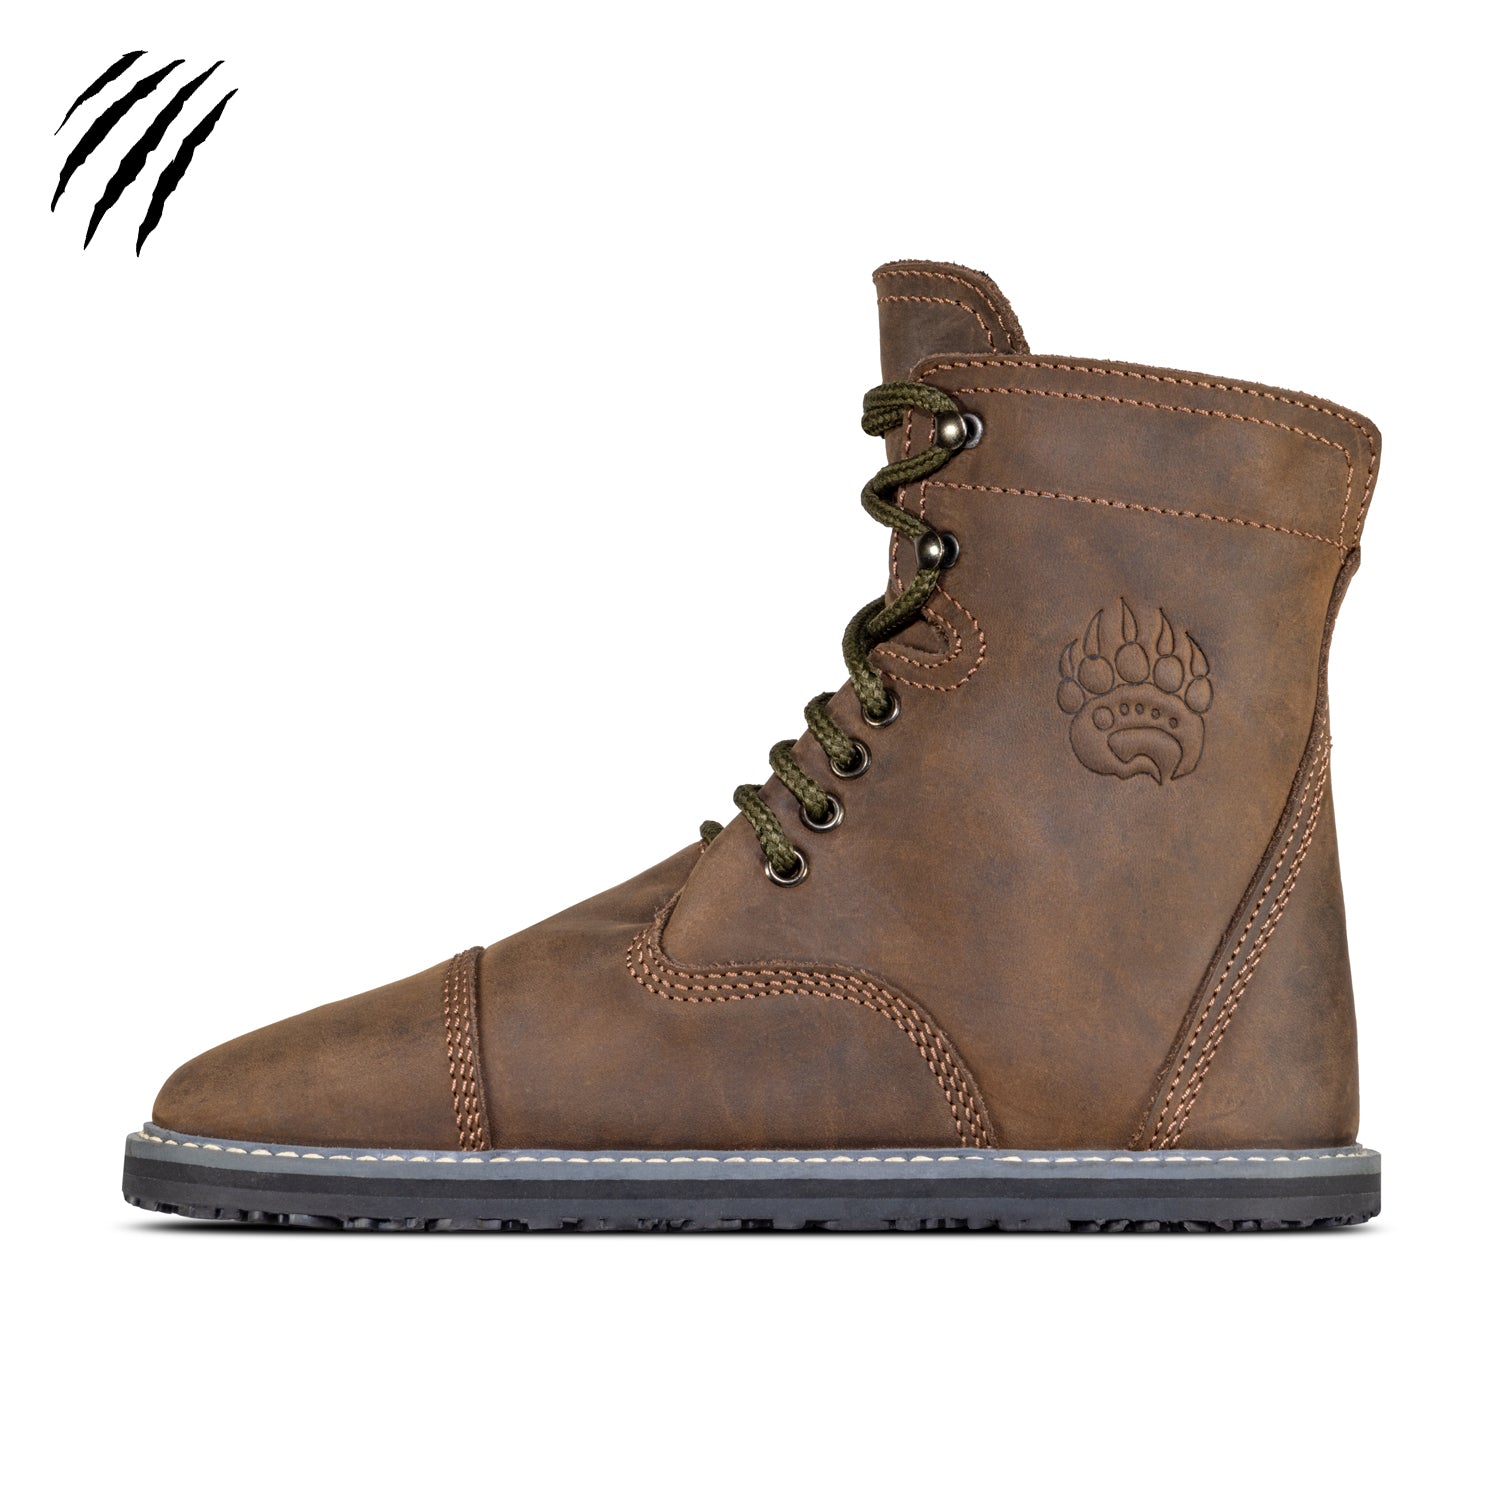 A Bruin Kodiak Brown boot with green laces, featuring a prominent Bearfoot logo embossed on the side, set against a white background.